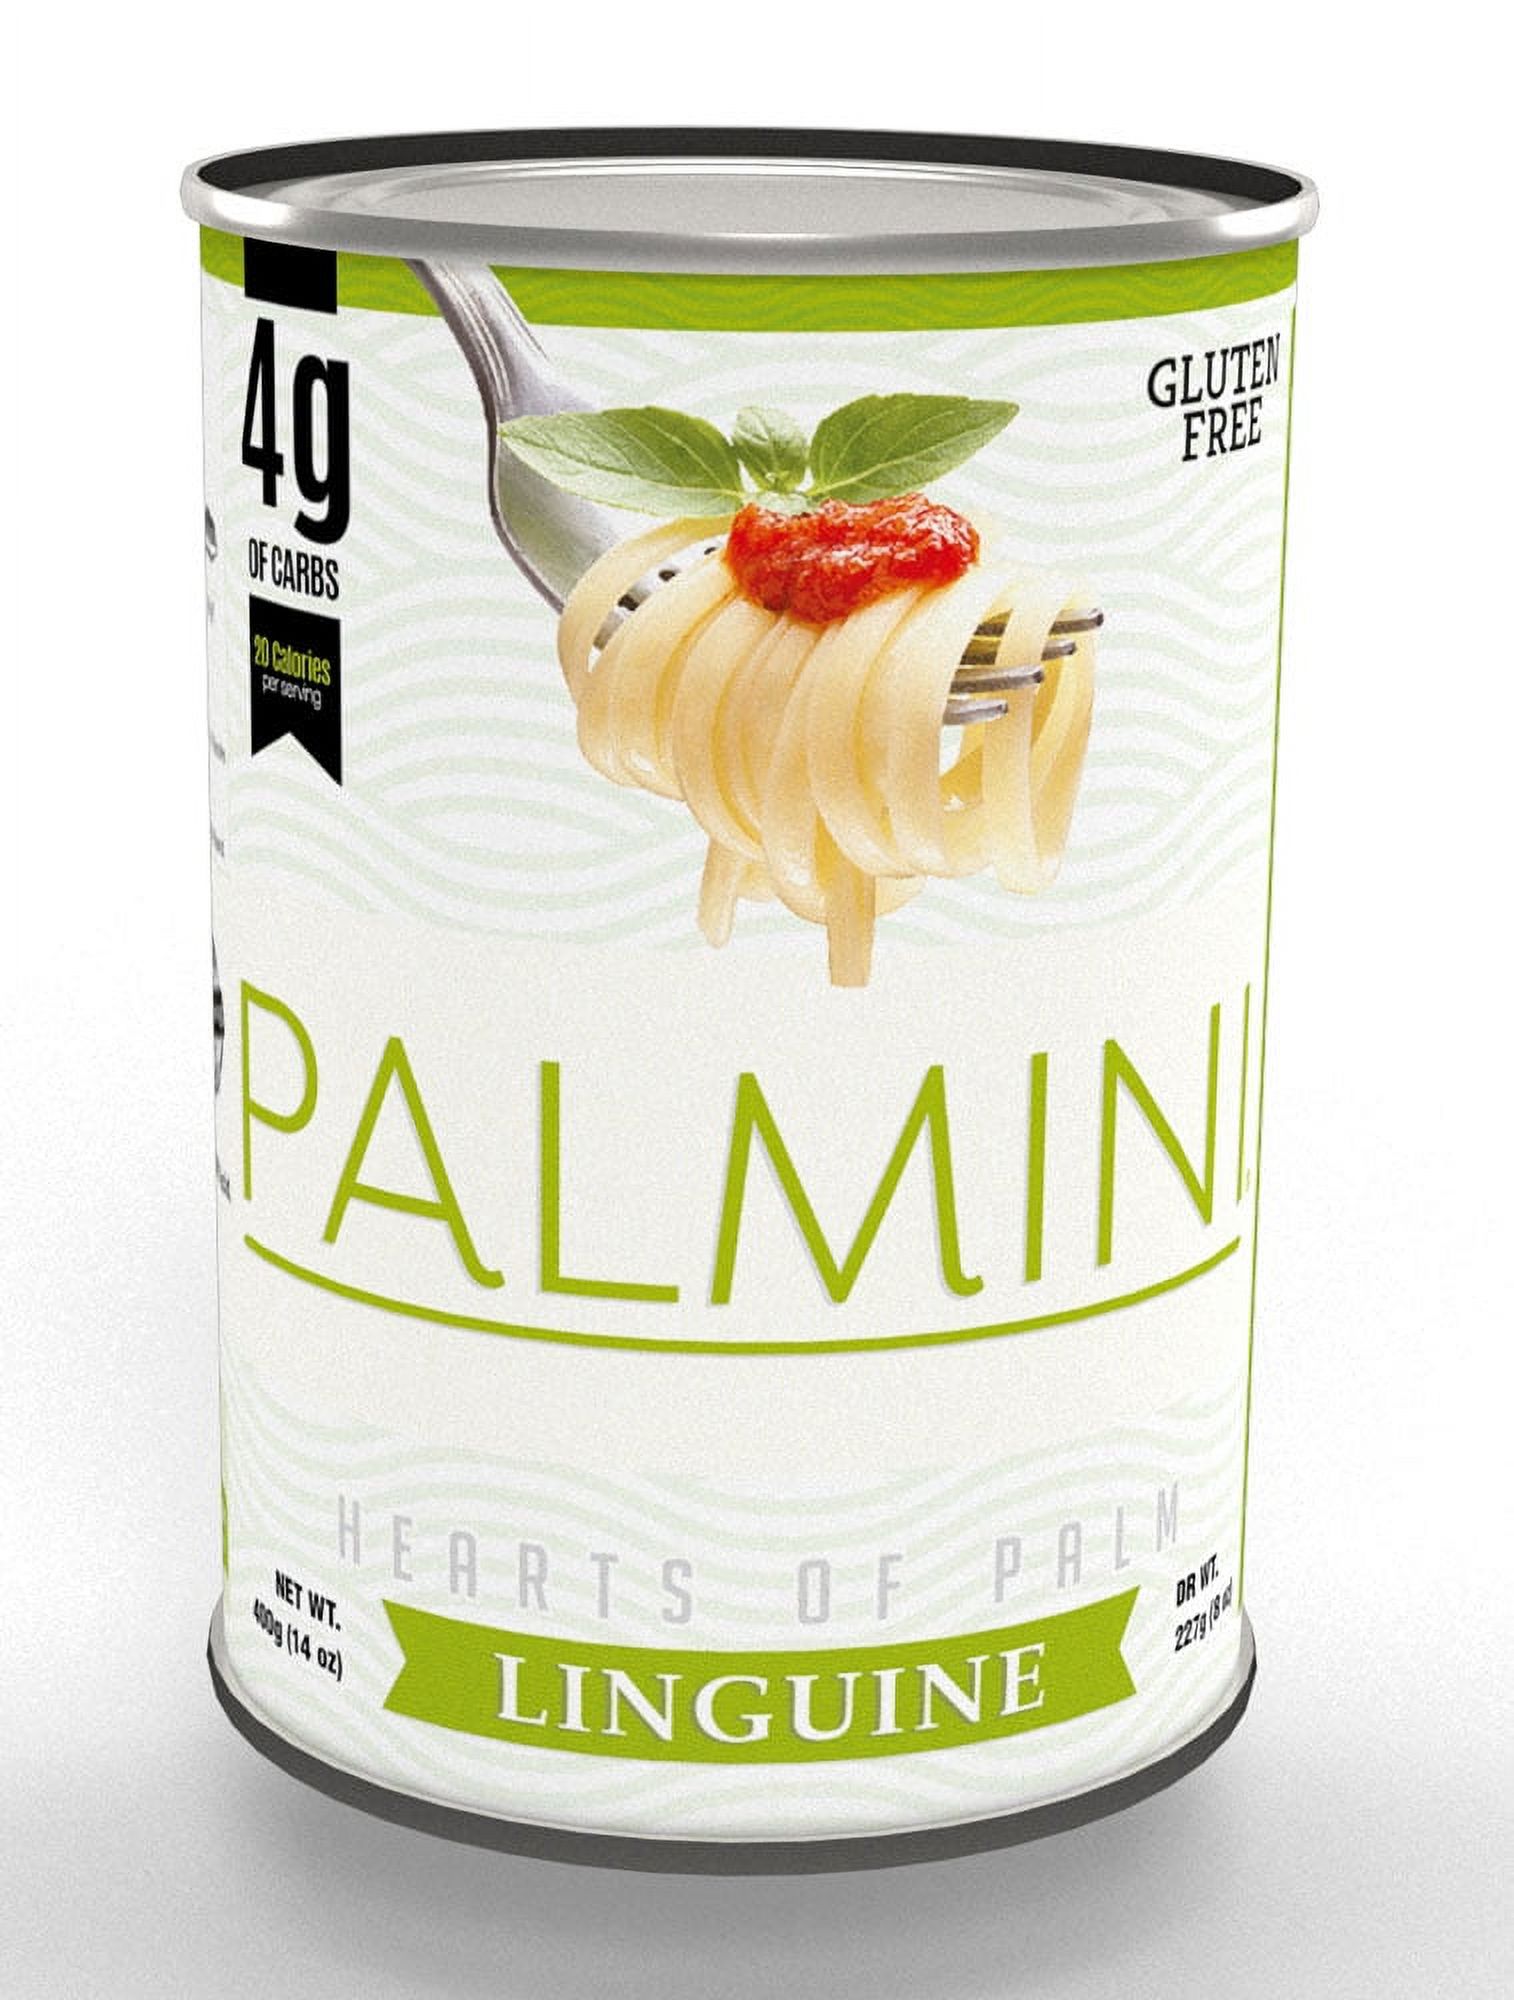 Palmini Hearts Of Palm Linguine Pasta, 14 oz Can - image 1 of 9